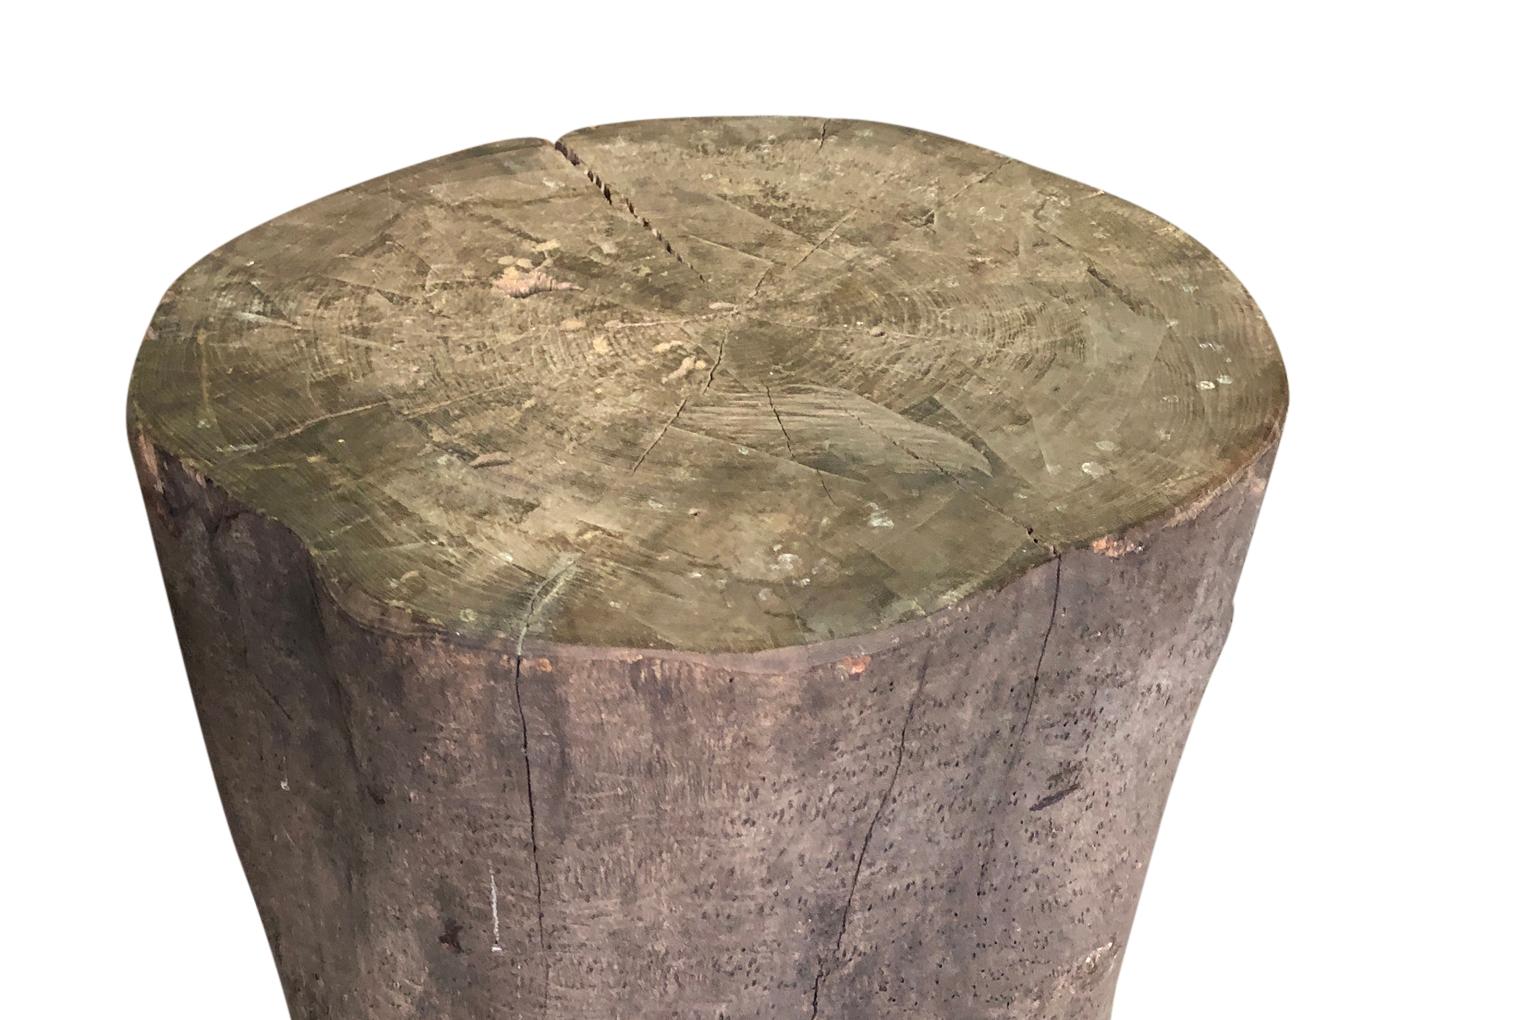 A terrific Primitive early 19th century Billot - Chopping block from the Ardeche region of France. A wonderful end table for any casual interior or exterior living area.